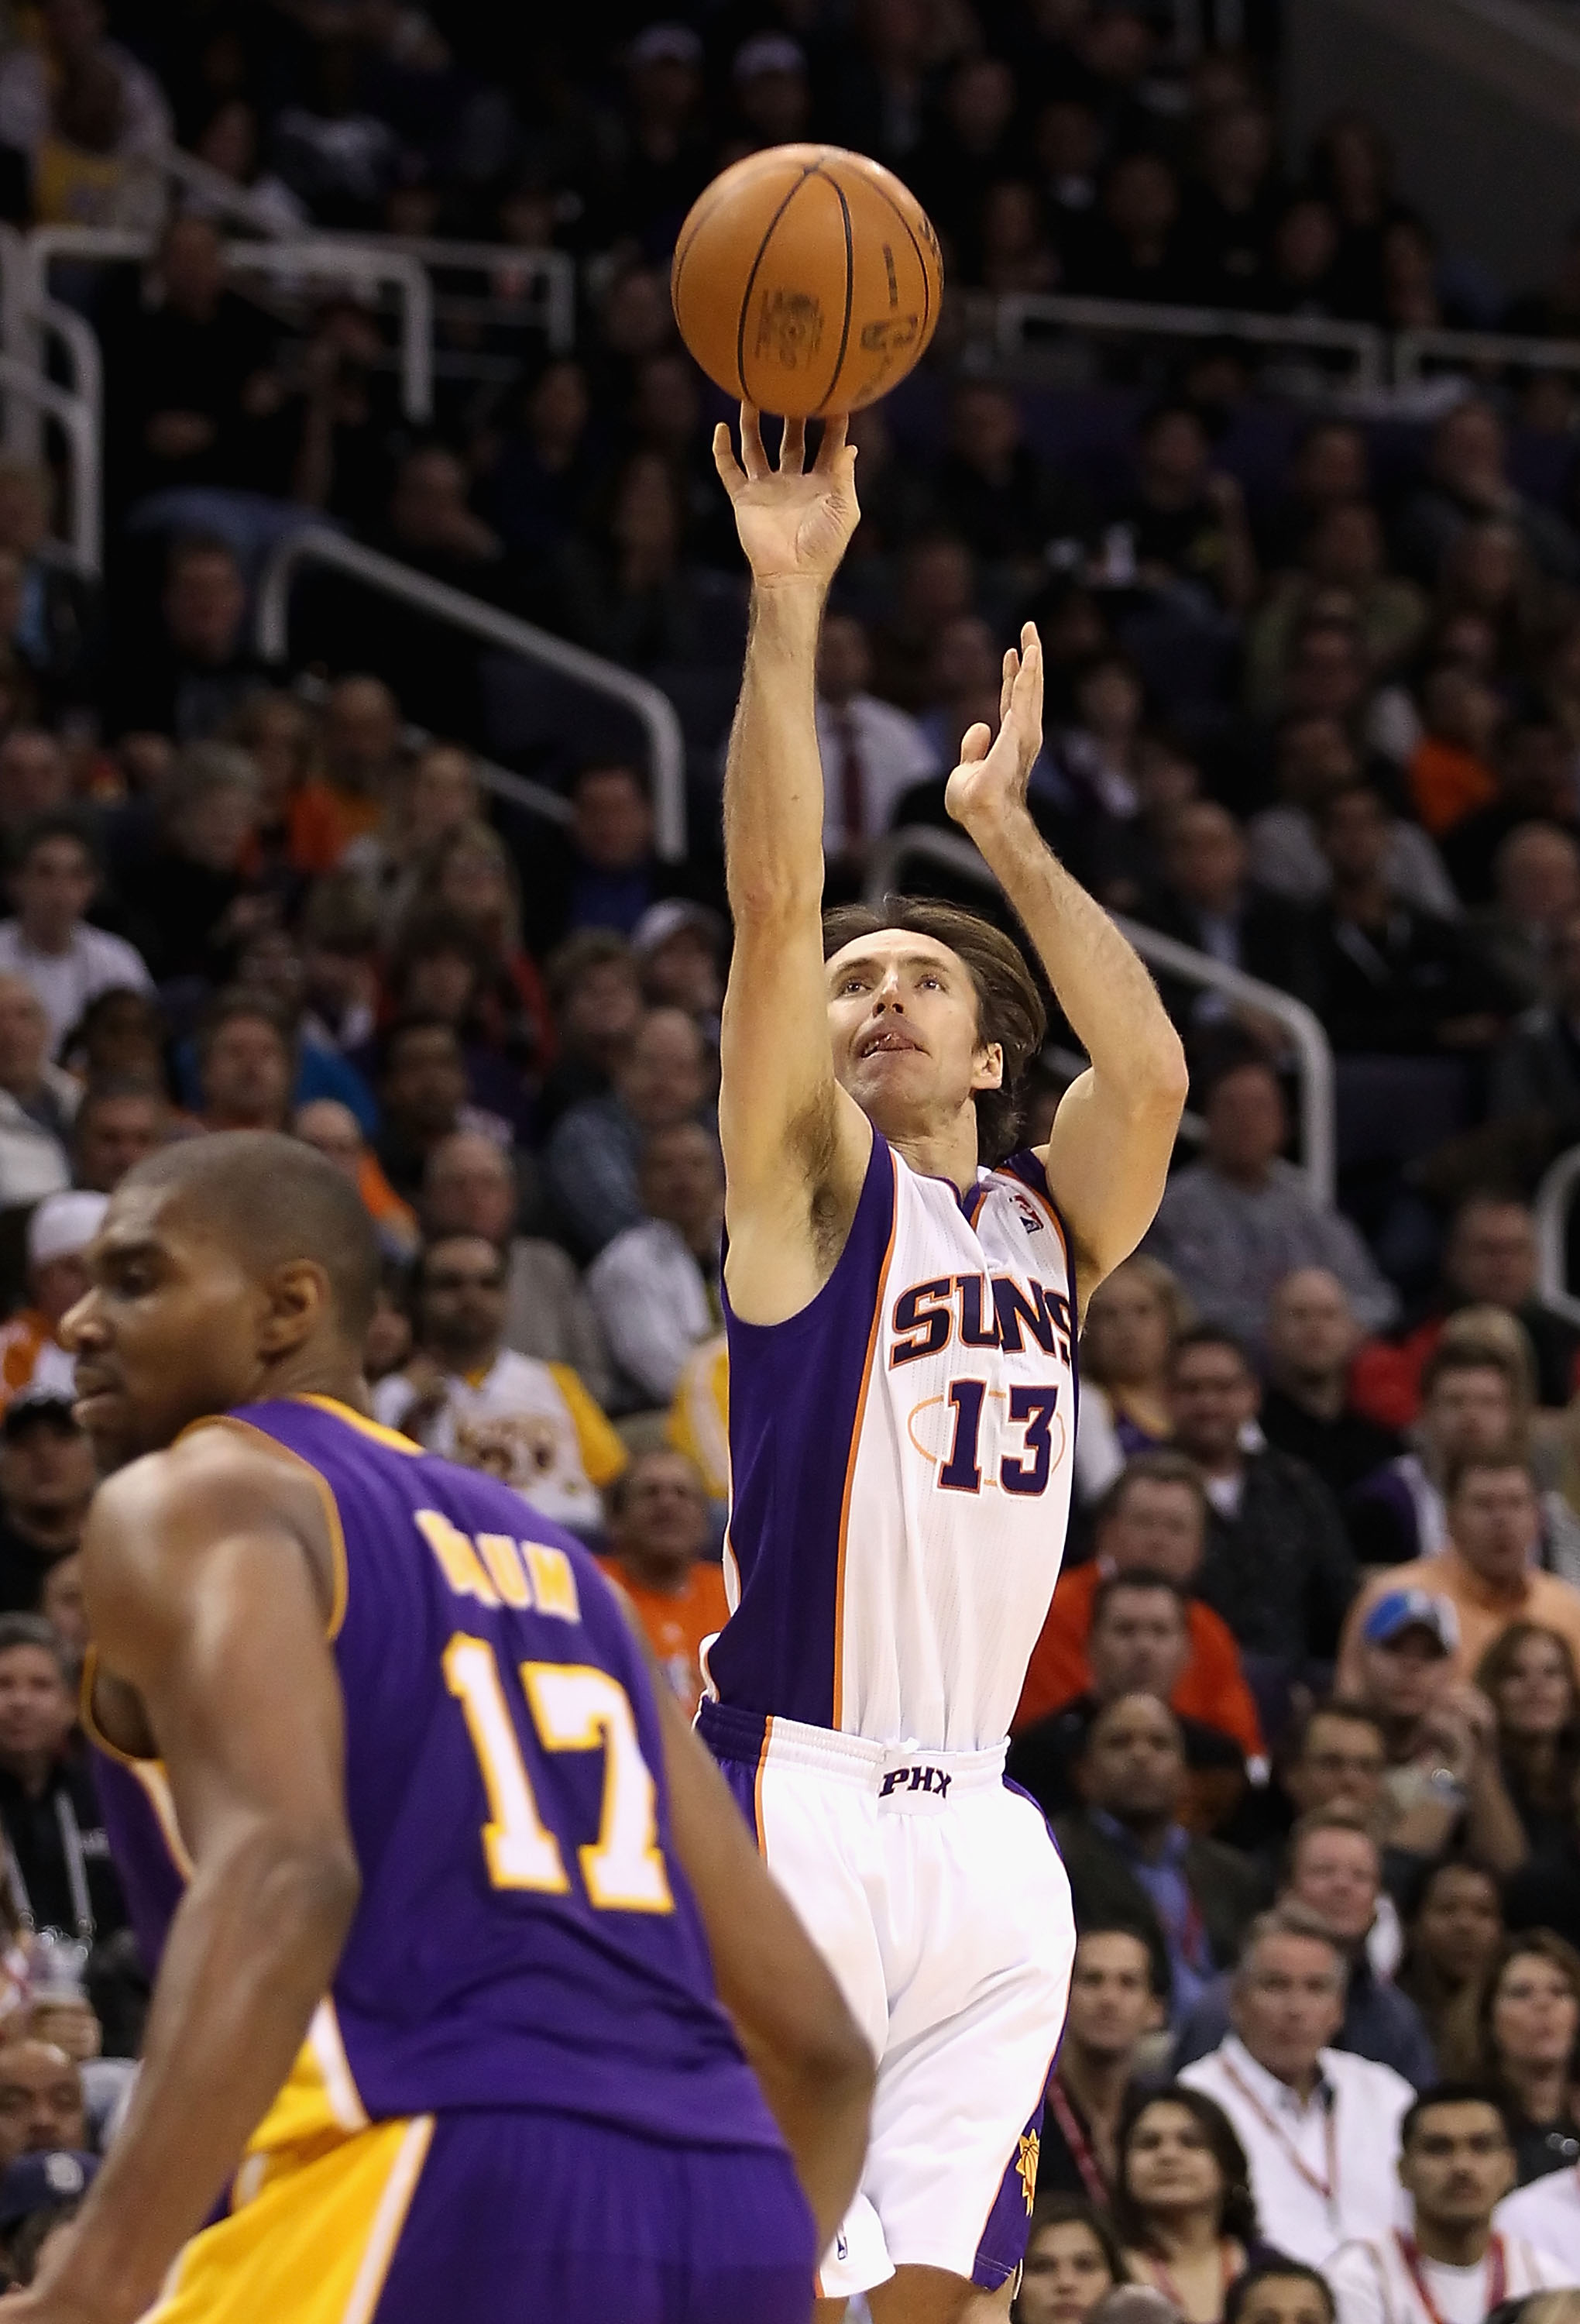 PHOENIX - JANUARY 05: Steve Nash #13 of the Phoenix Suns puts up a shot over Andrew Bynum #17 of the Los Angeles Lakers during the NBA game at US Airways Center on January 5, 2011 in Phoenix, Arizona. NOTE TO USER: User expressly acknowledges and agrees t